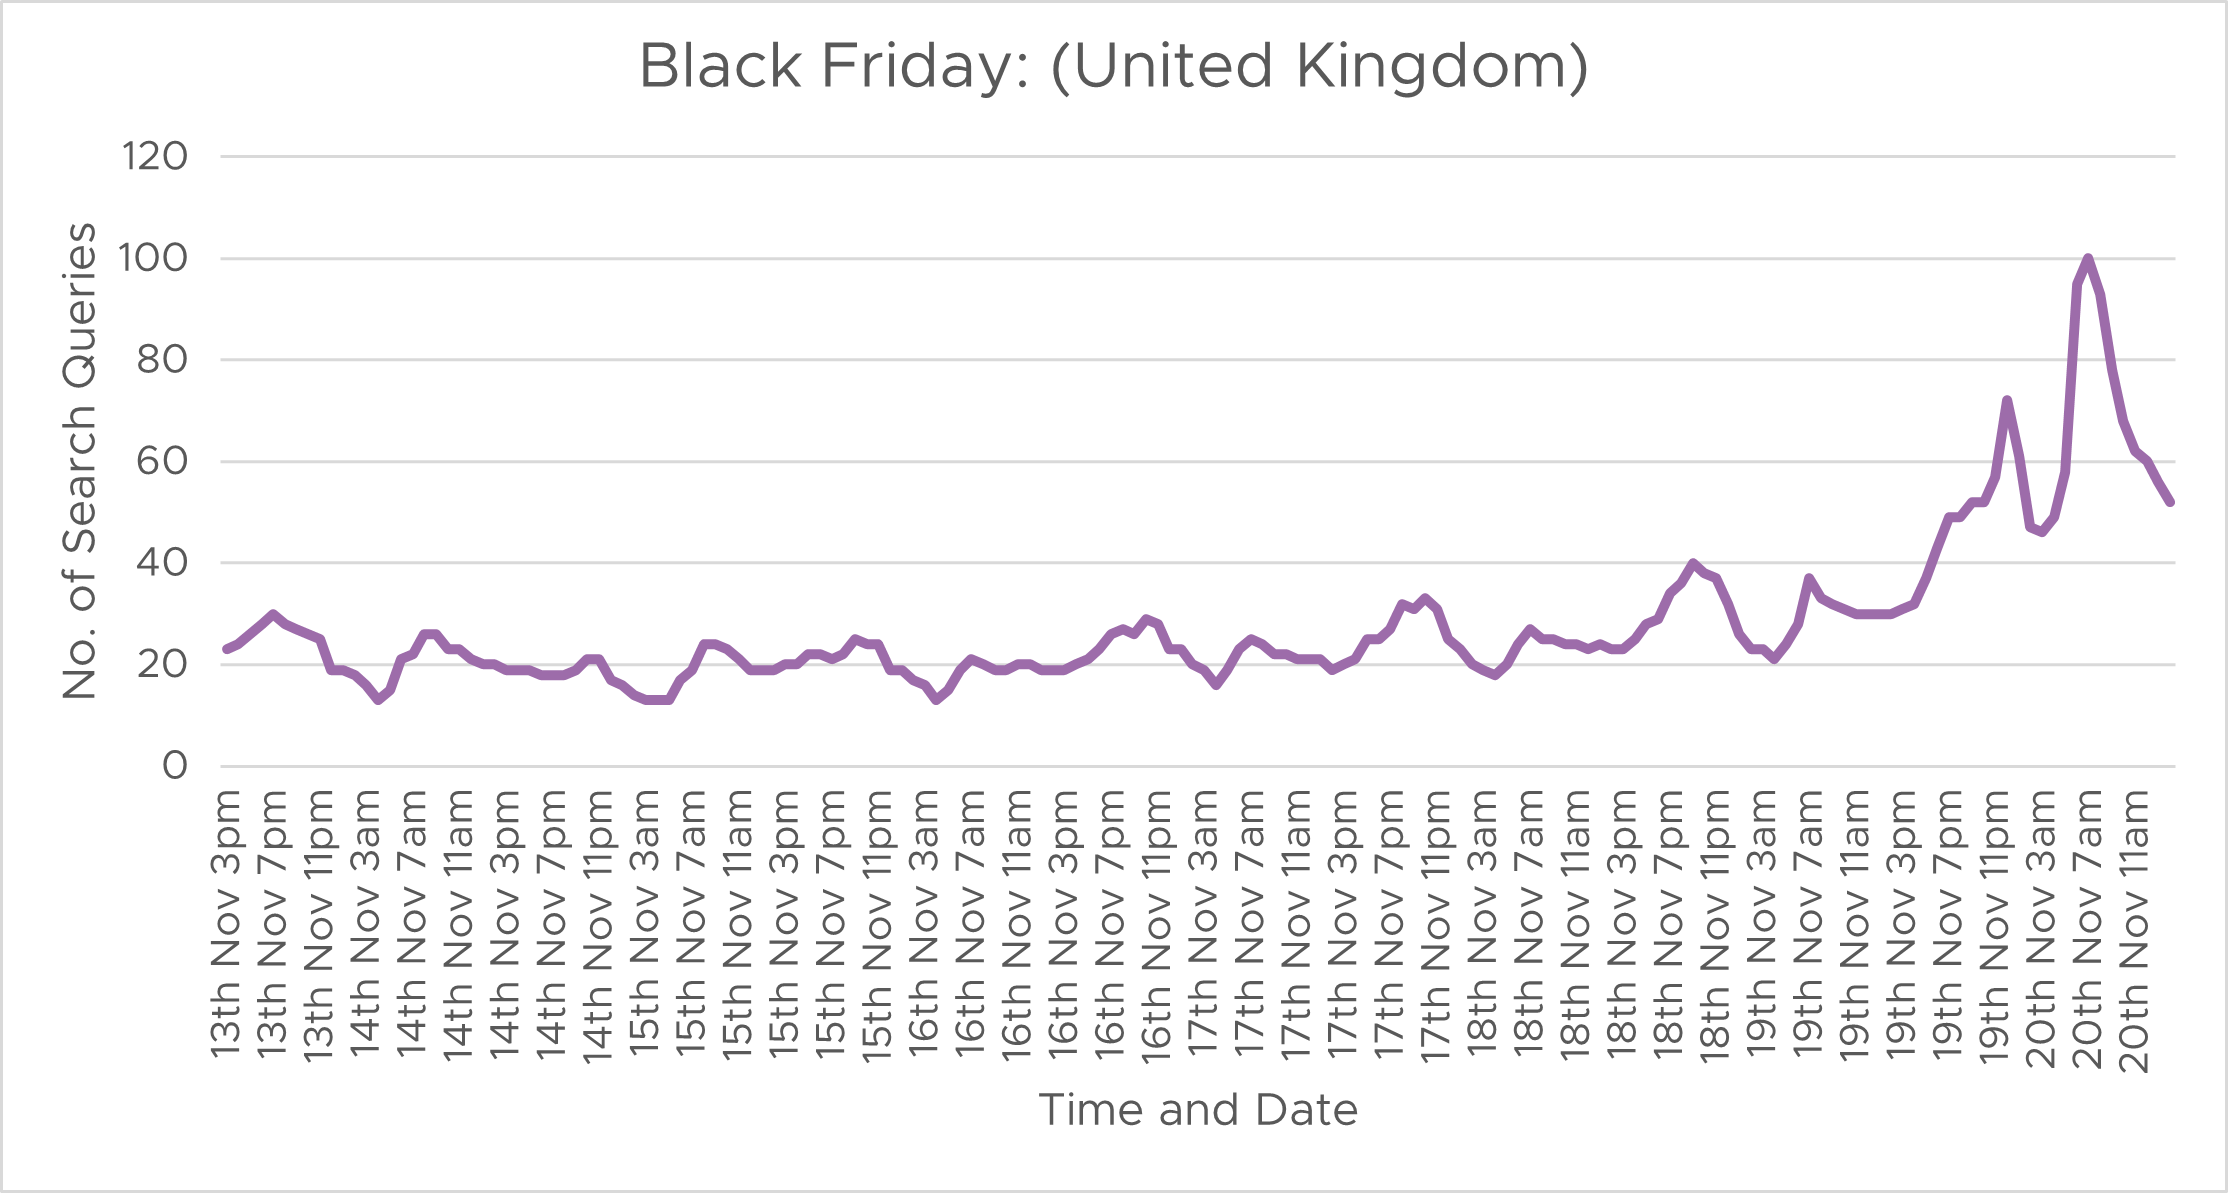 Black Friday Search Queries